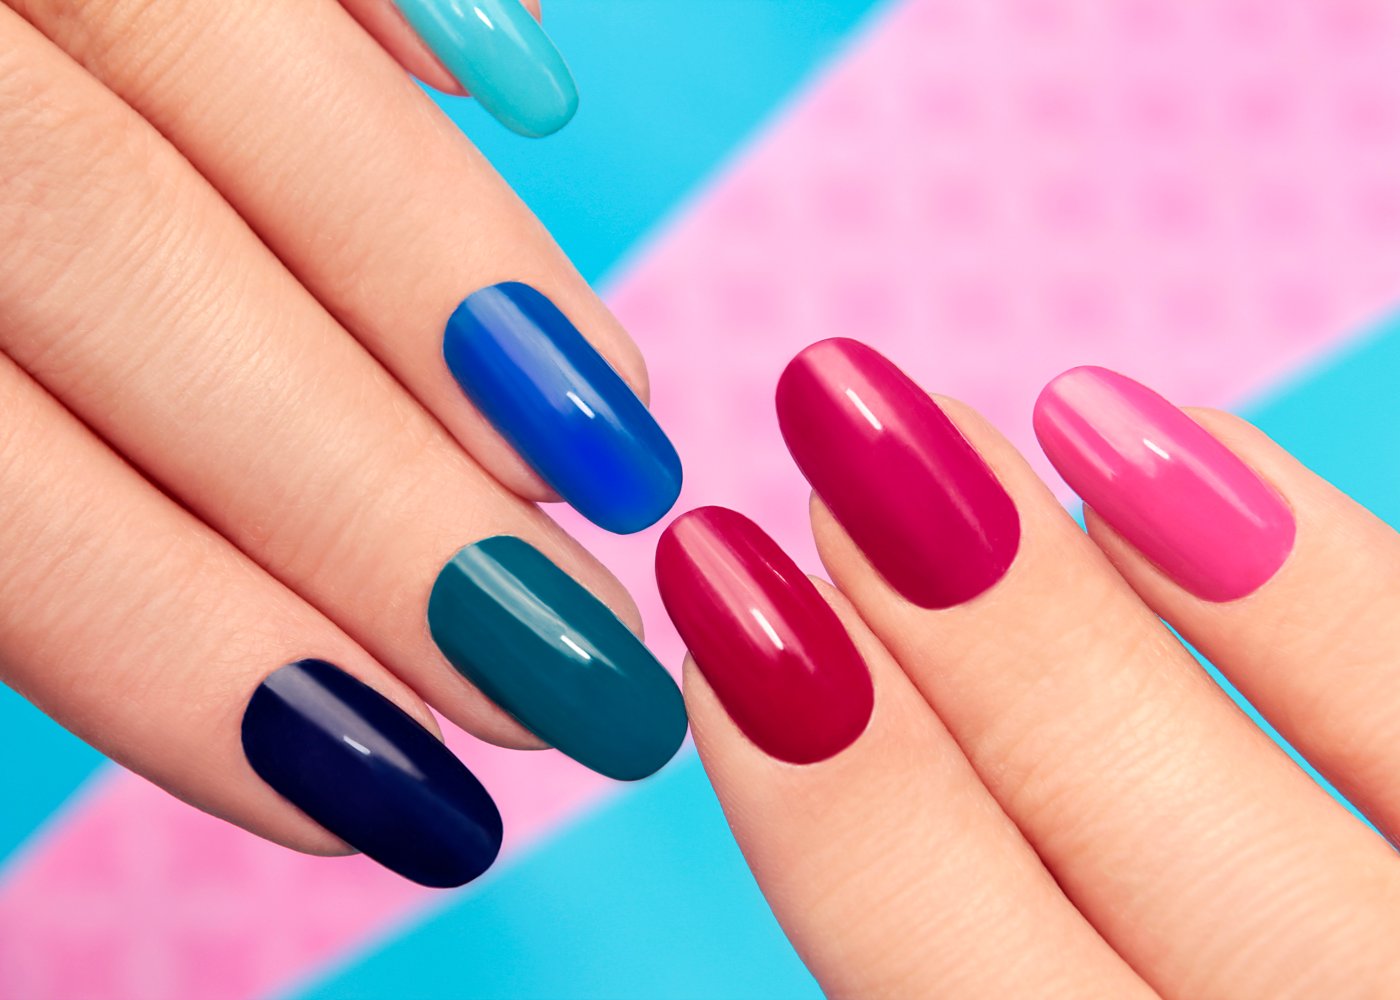 2. Top 10 Gel Nail Polishes for Color Shifting Jewelery - wide 5